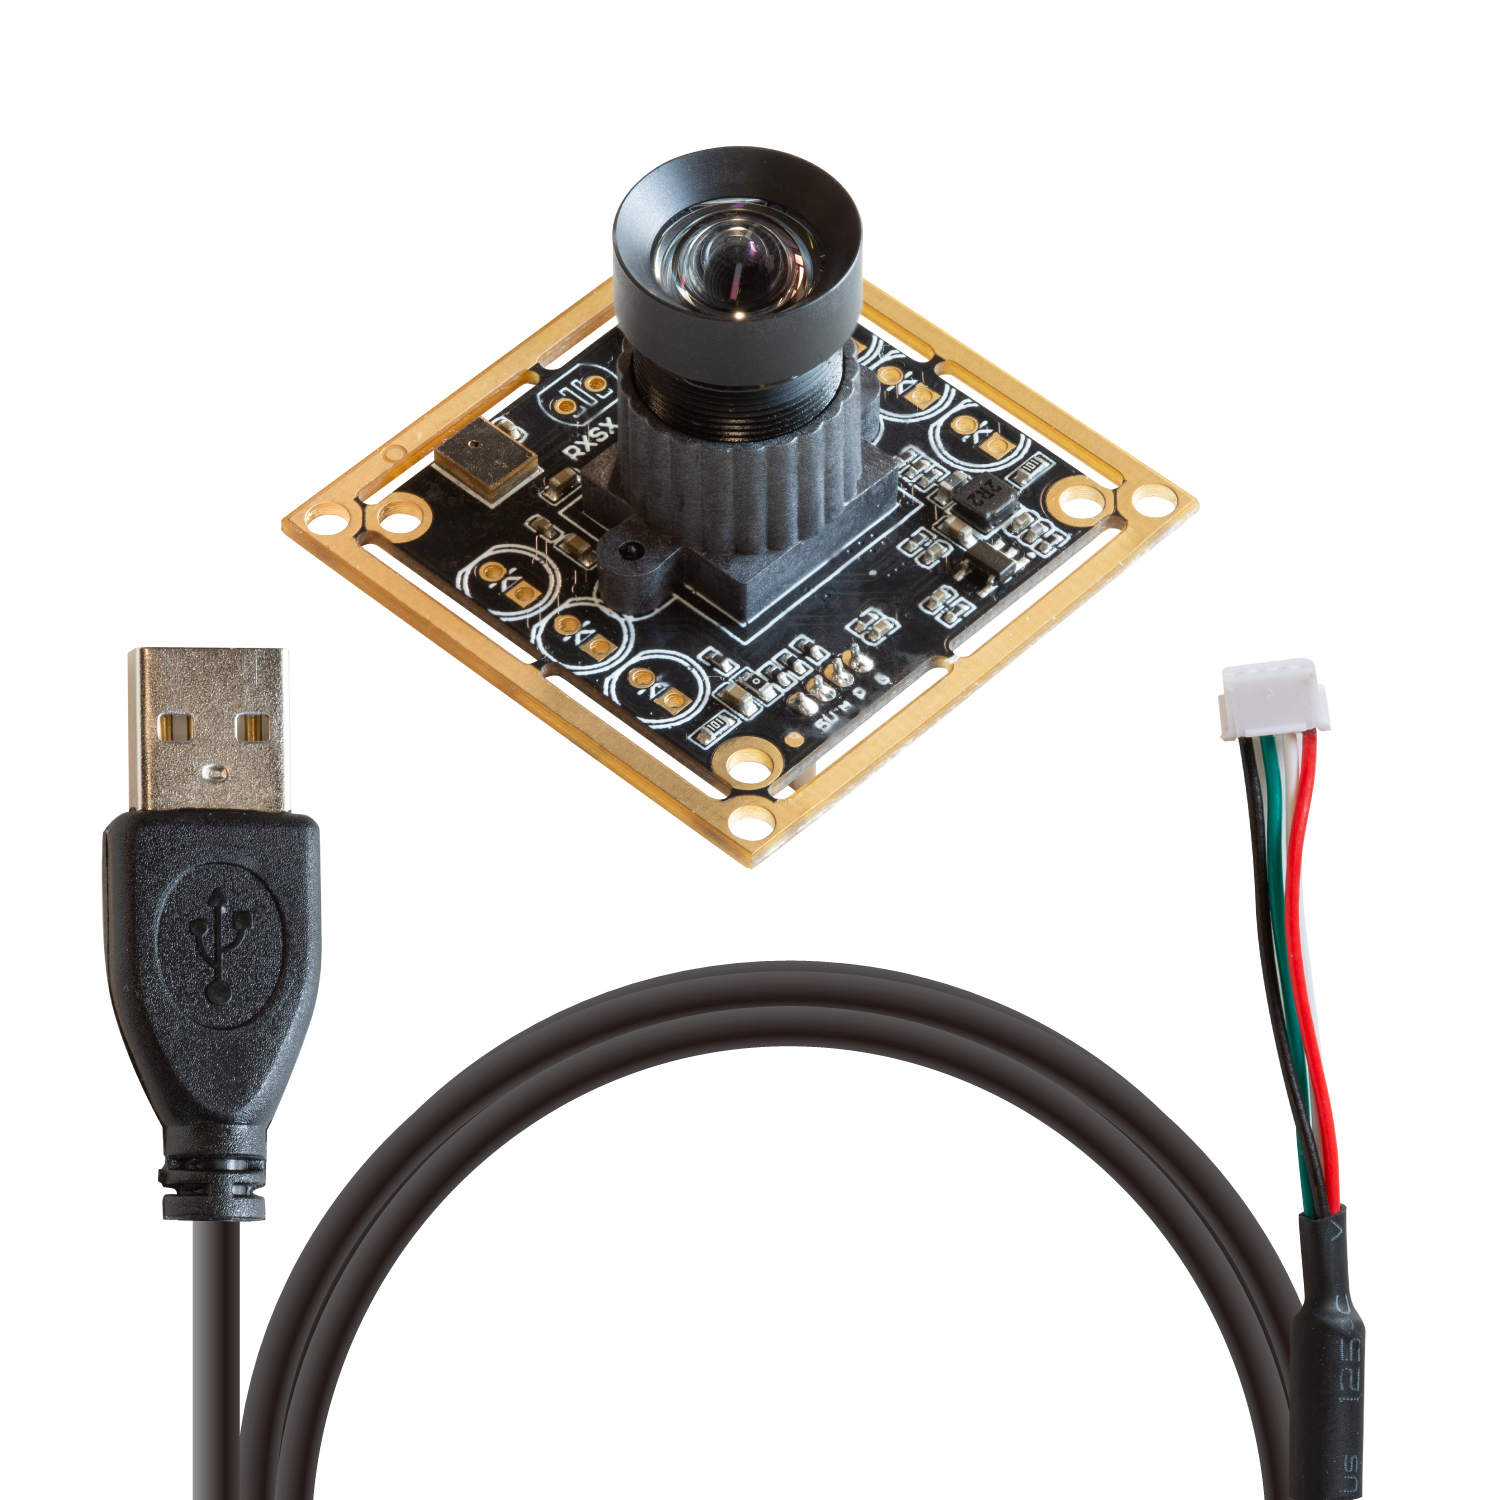 1MP OV9281 Global Shutter USB Camera Board with Low Distortion M12 Lens, Dual Microphones UVC USB2.0 Webcam Module for Computer, Laptop, Android Device and Raspberry Pi